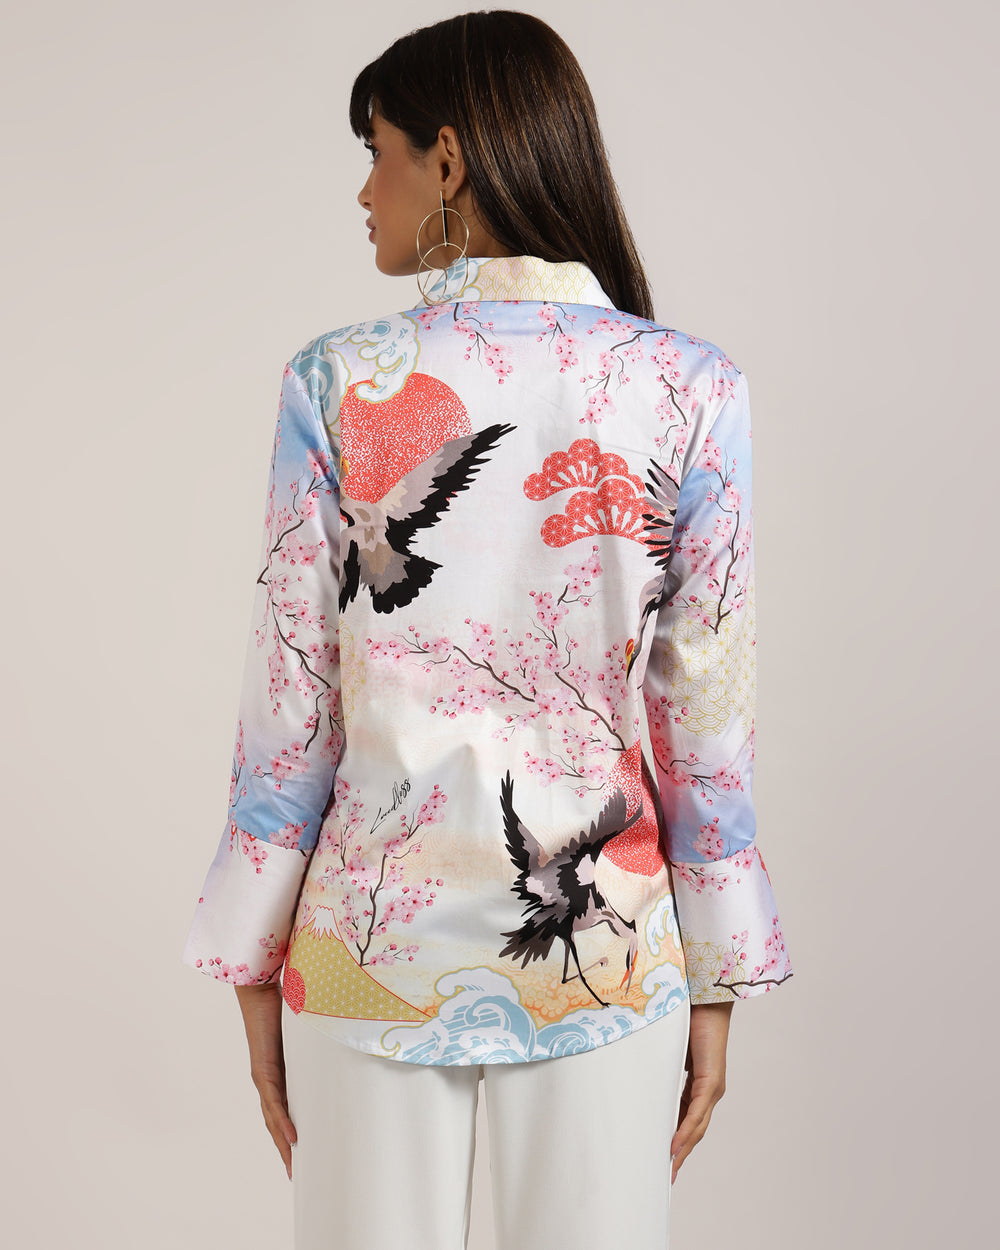 Women's top featuring Japanese-inspired print by LoudLess